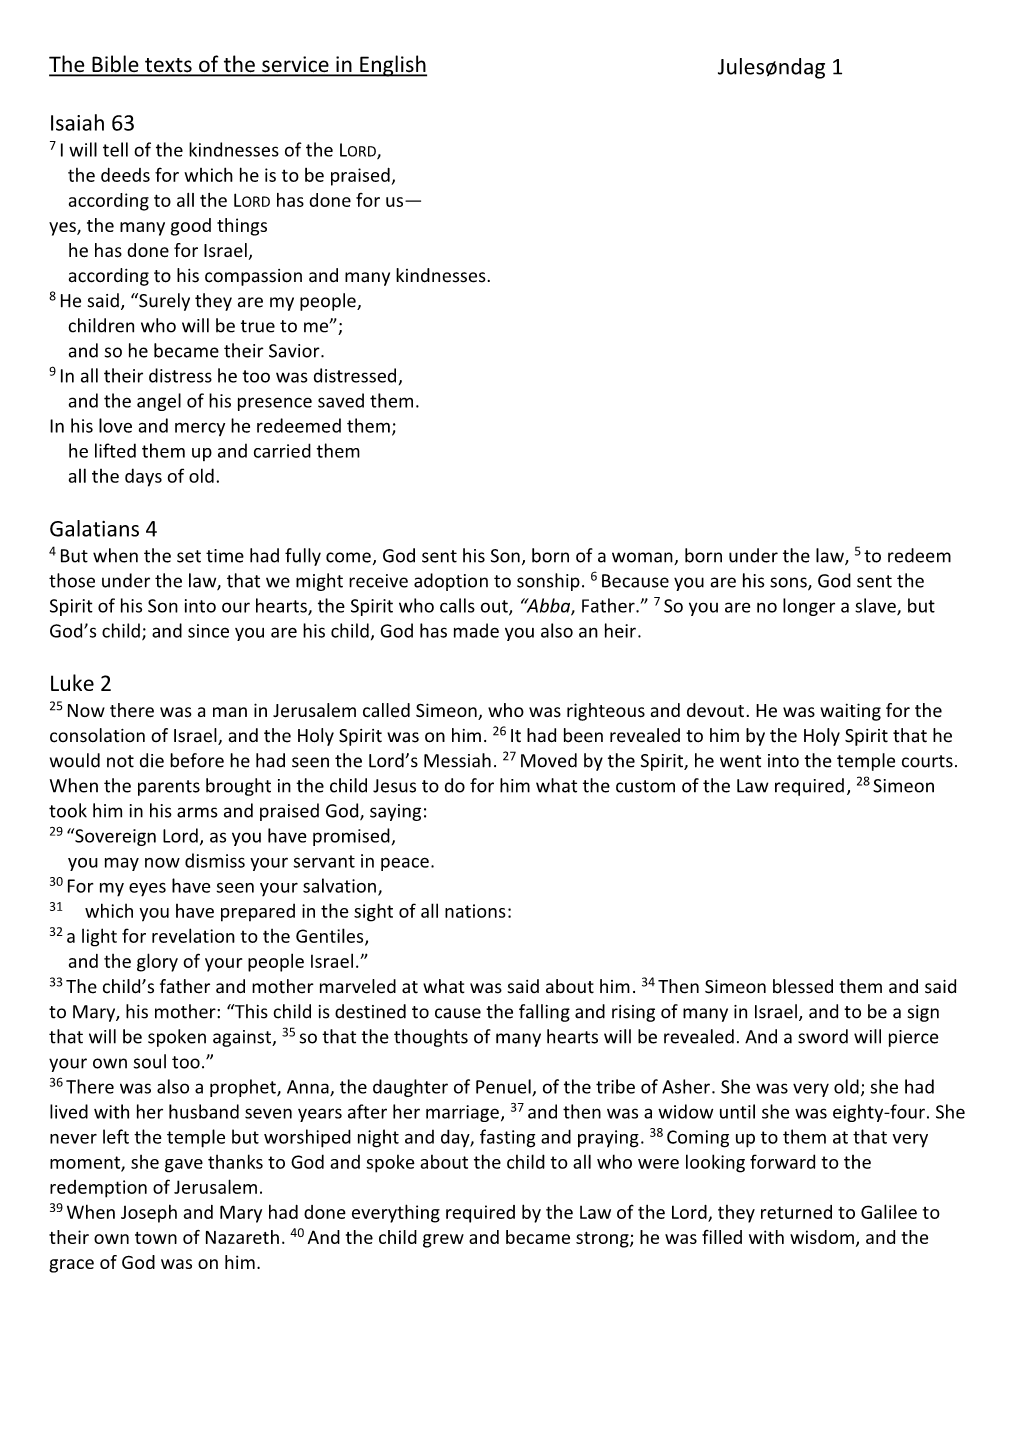 The Bible Texts of the Service in English Isaiah 63 Galatians 4 Luke